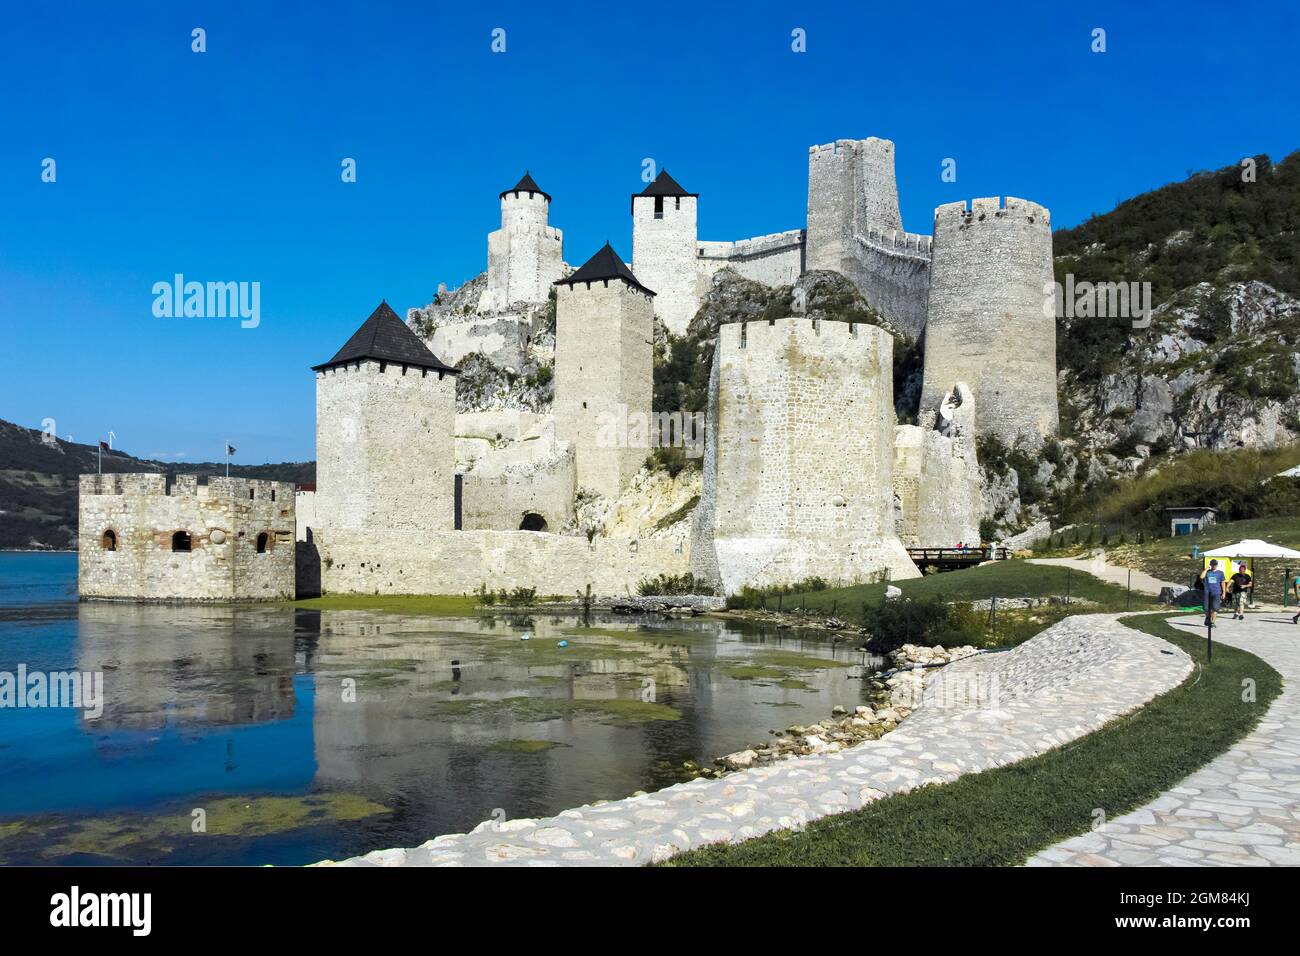 GOLUBAC, SERBIA - AUGUST 11, 2019: Golubac Fortress -  medieval fortified town on the south side of the Danube River, Serbia Stock Photo